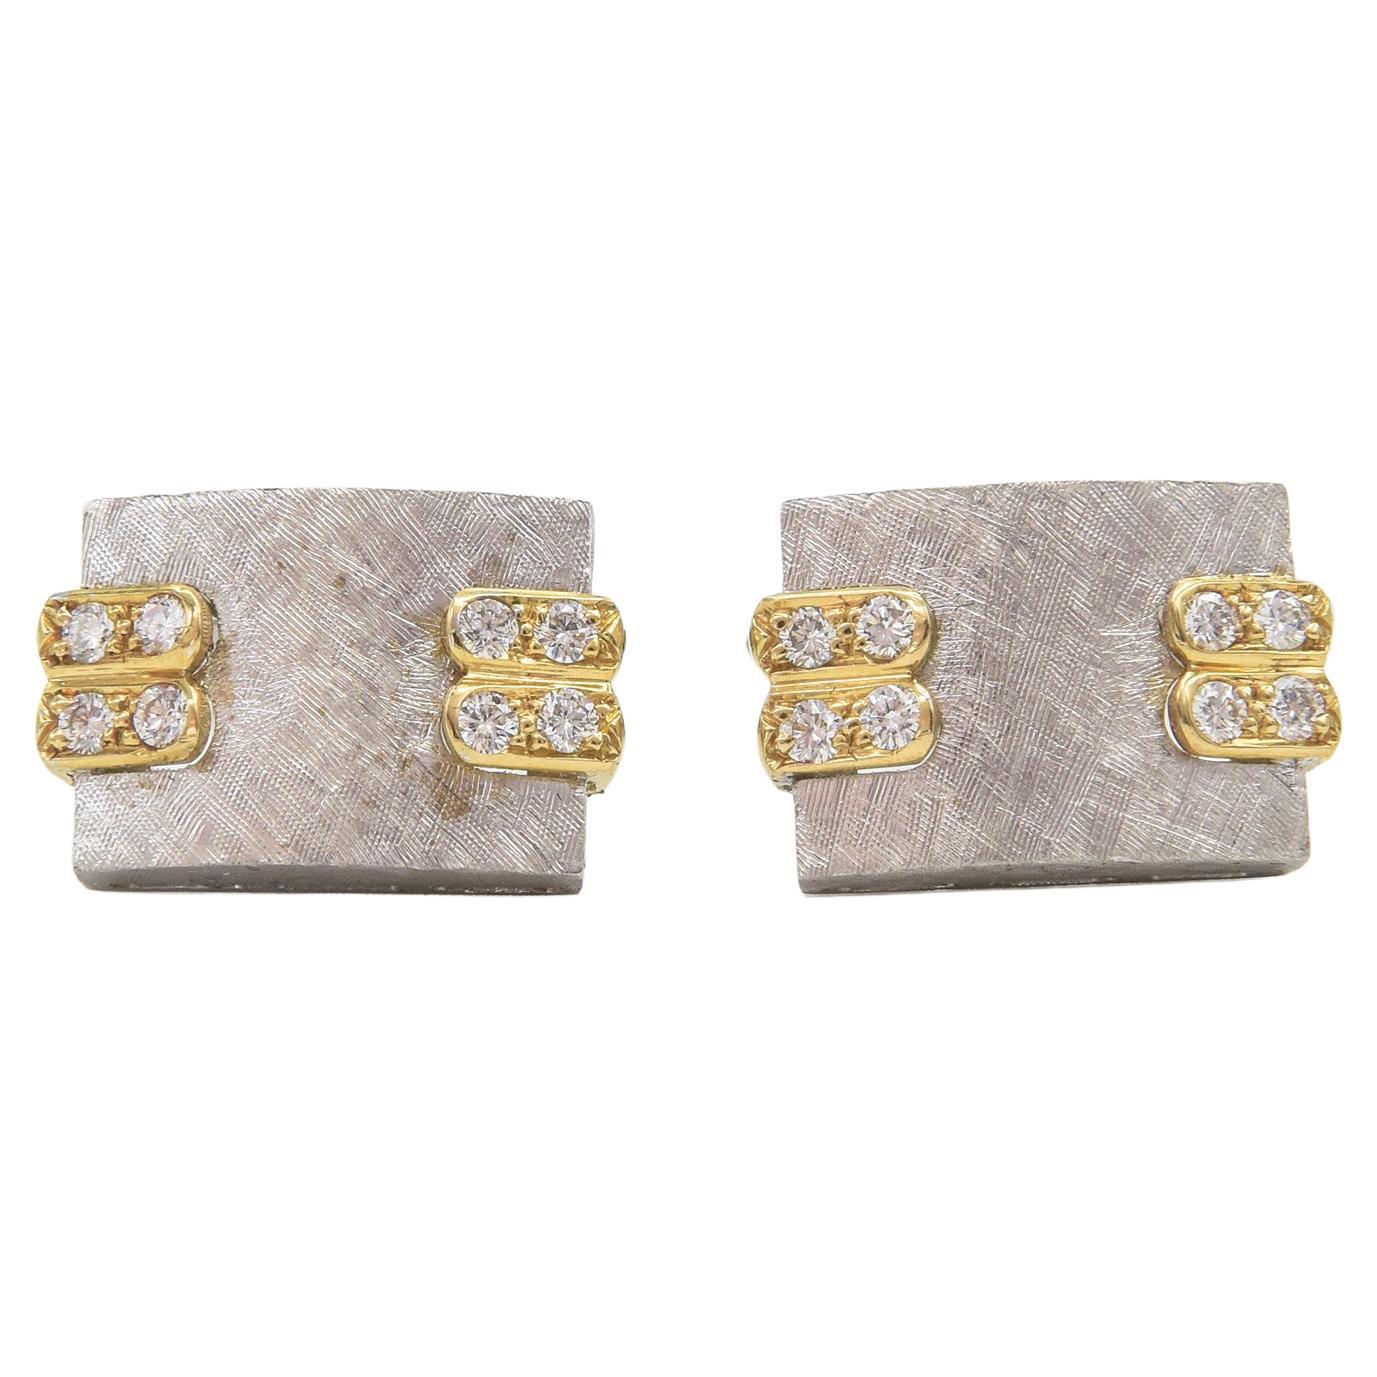 1970s Florentine Finished White Gold with Diamond Yellow Gold Accents Cufflinks